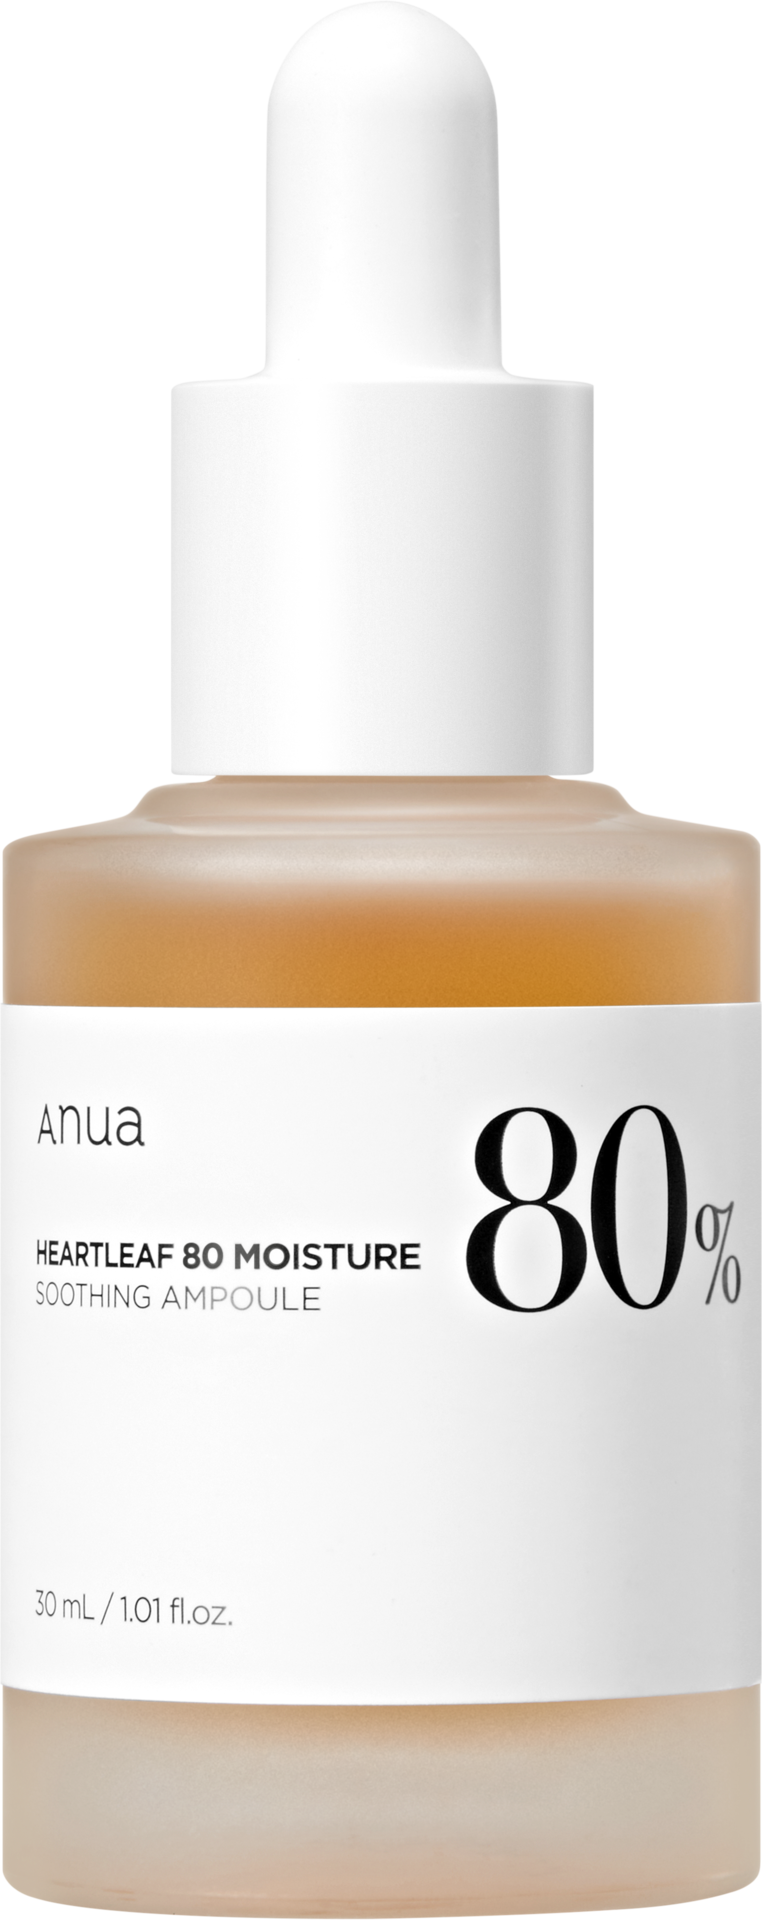 Anua Heartleaf 80% Soothing Ampoule 30ml